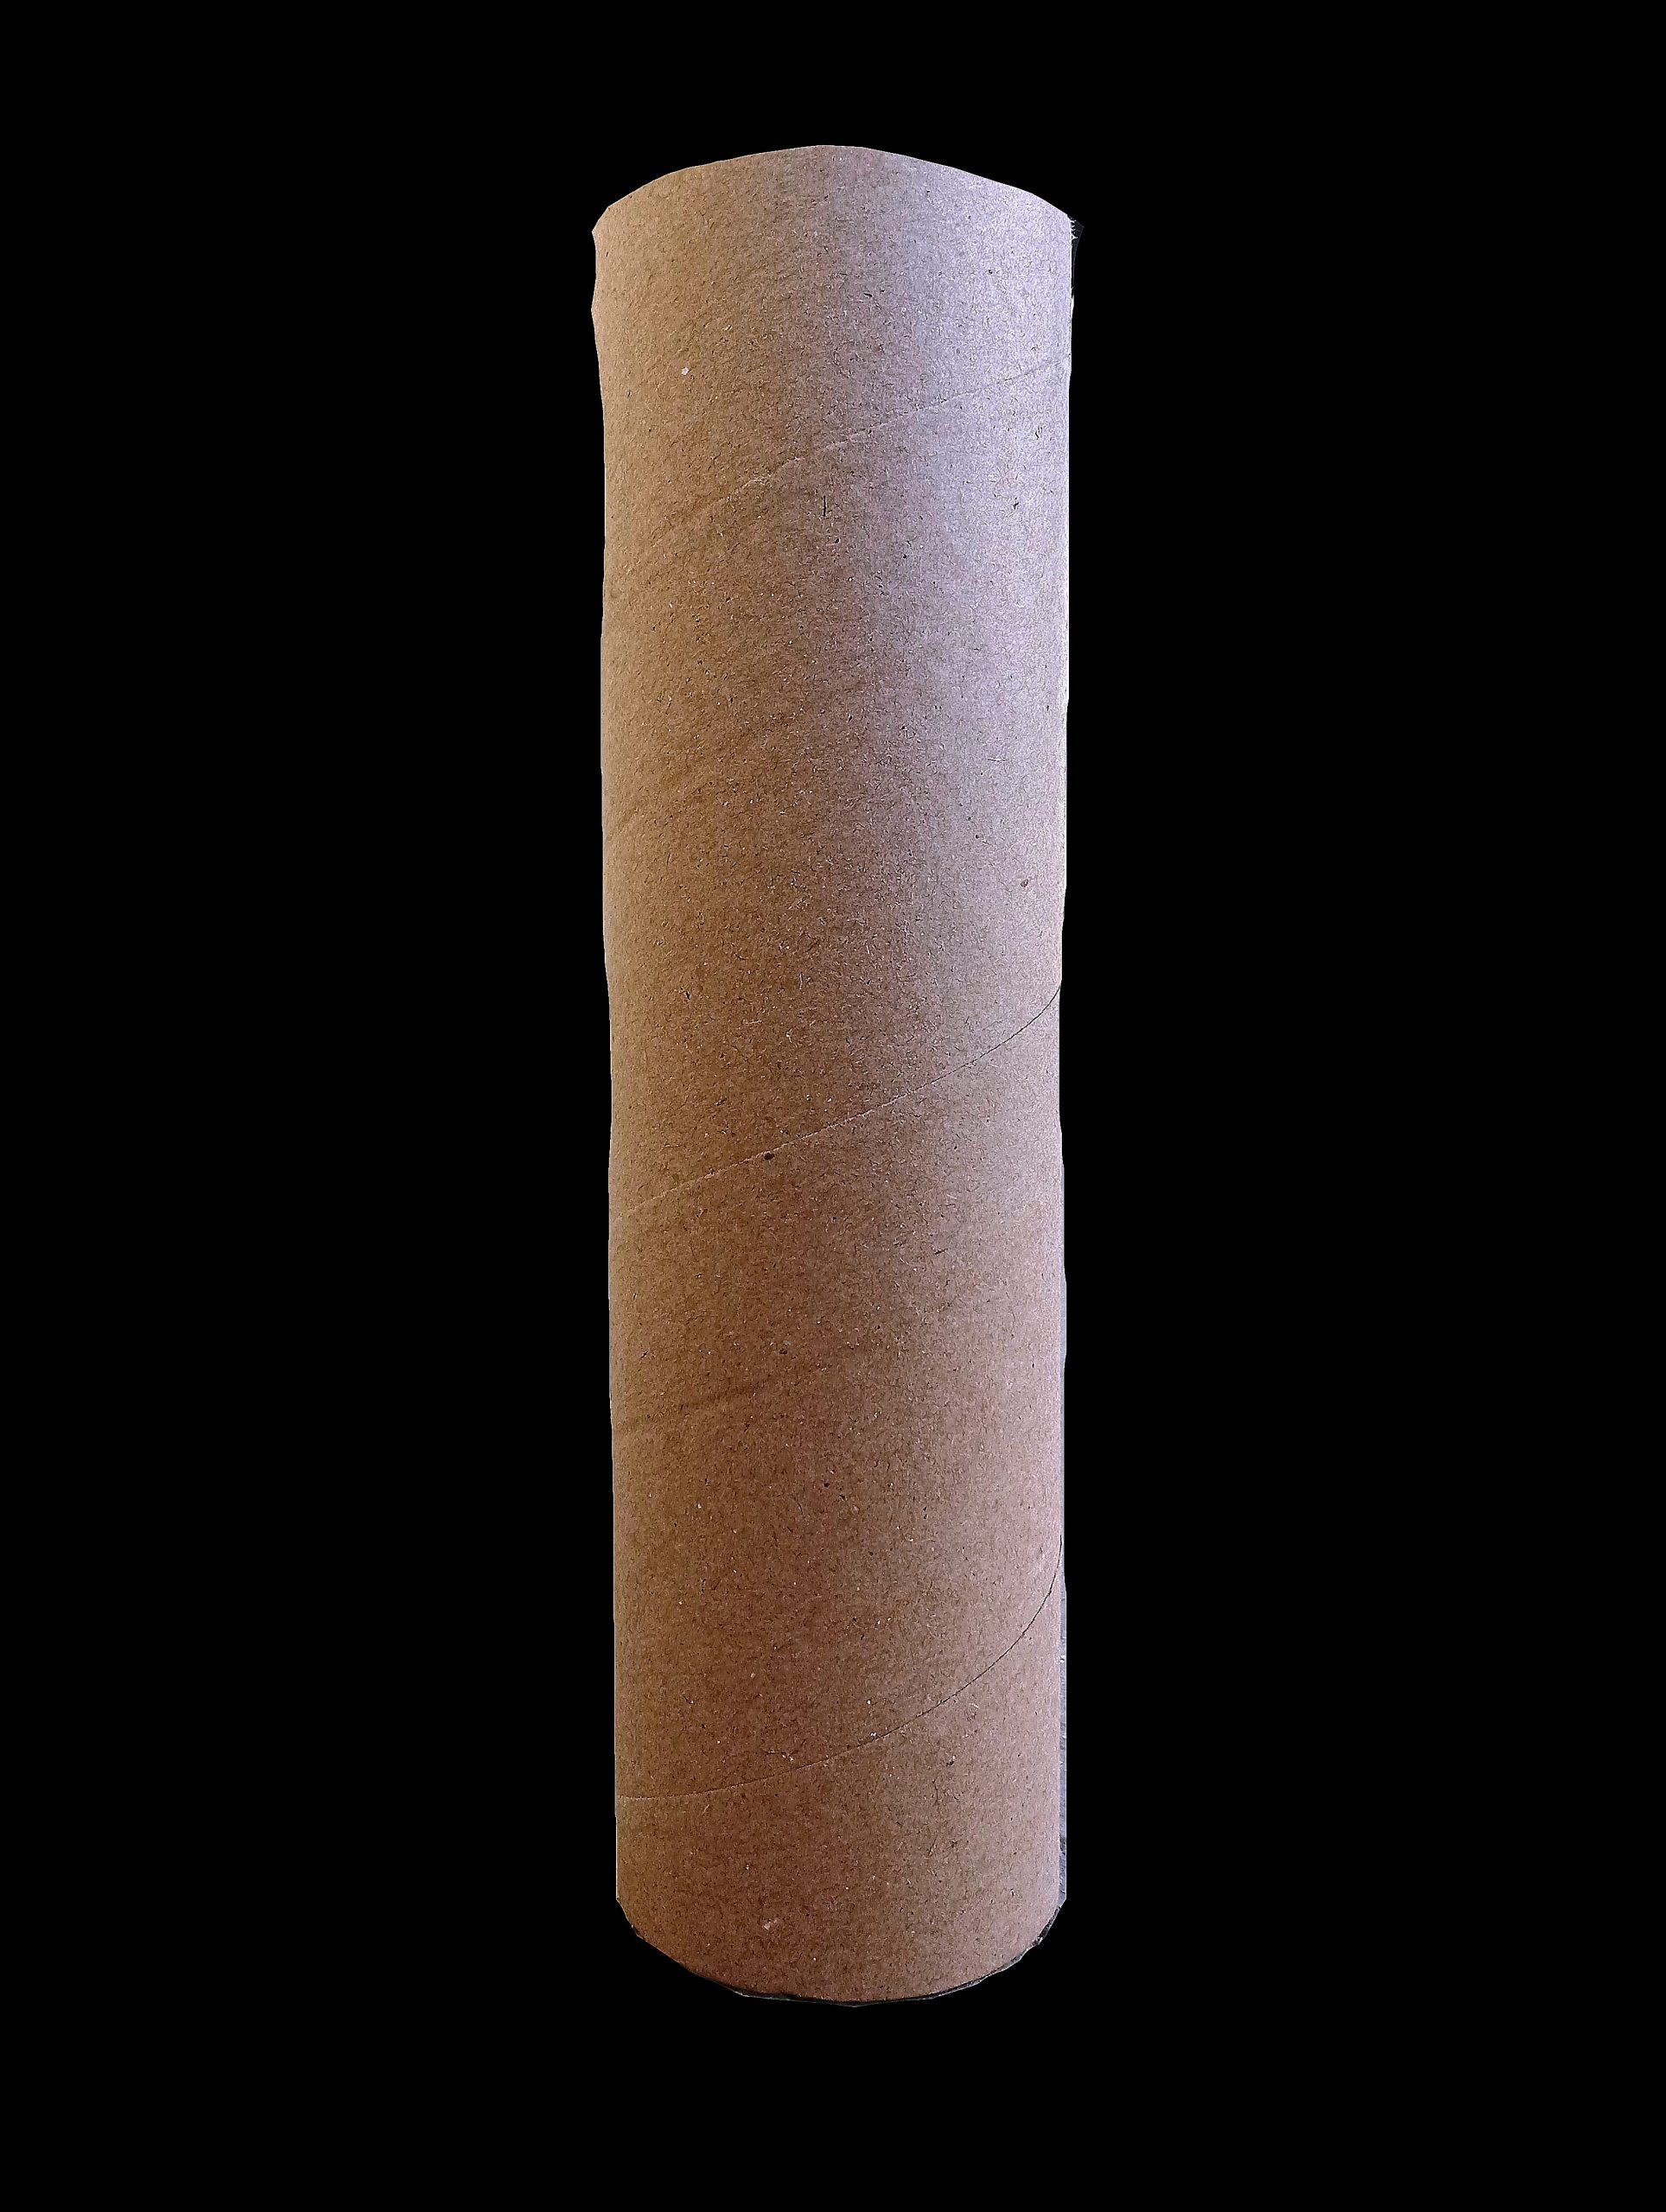 A cotton roll